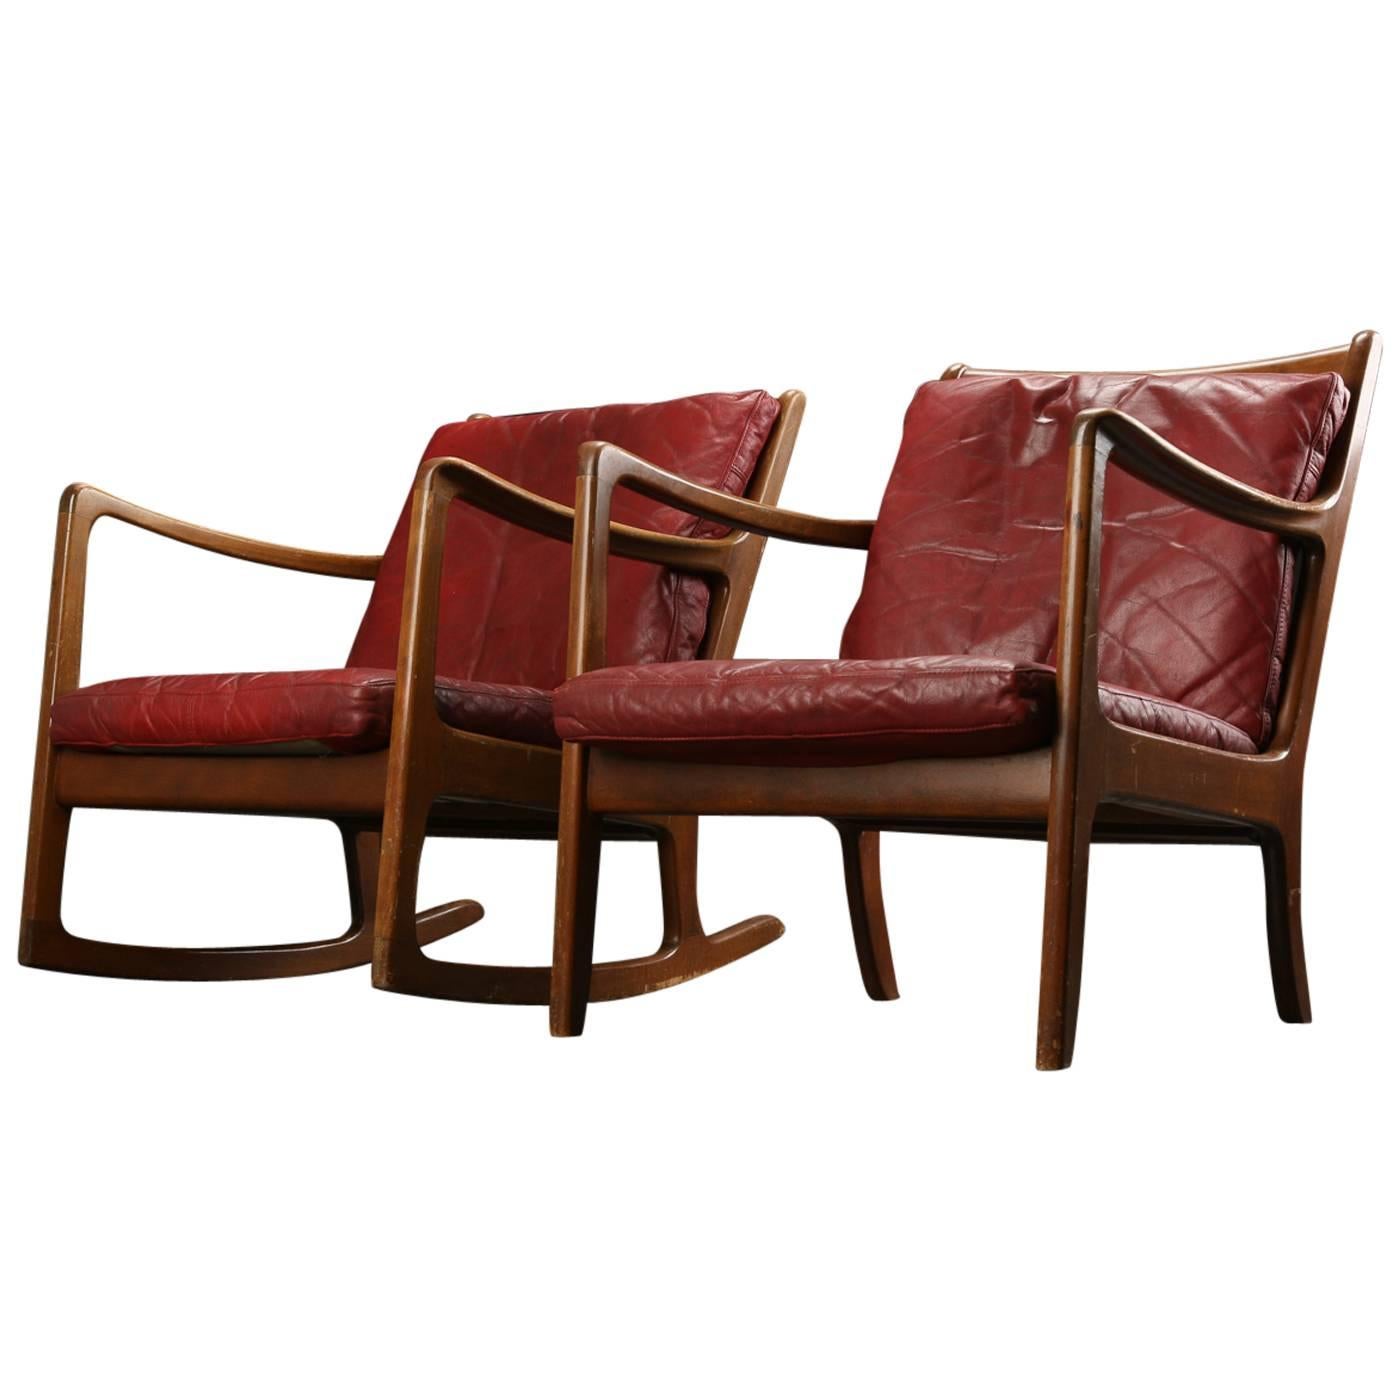 Ole Wanscher Rocking and Lounge Chairs in Red Leather